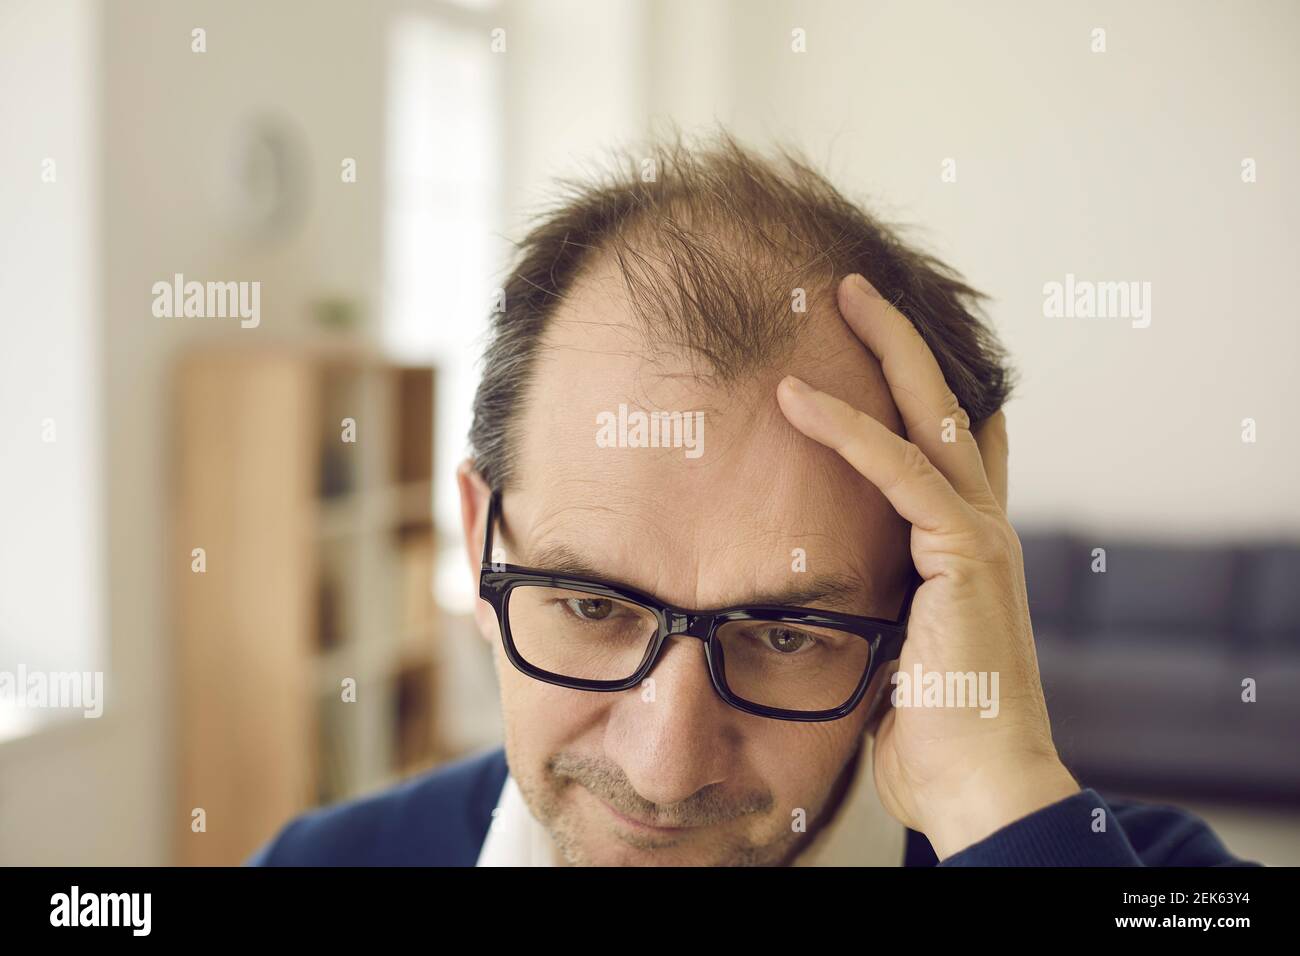 Balding middle aged man concerned about hair loss touches bald spots on his head Stock Photo